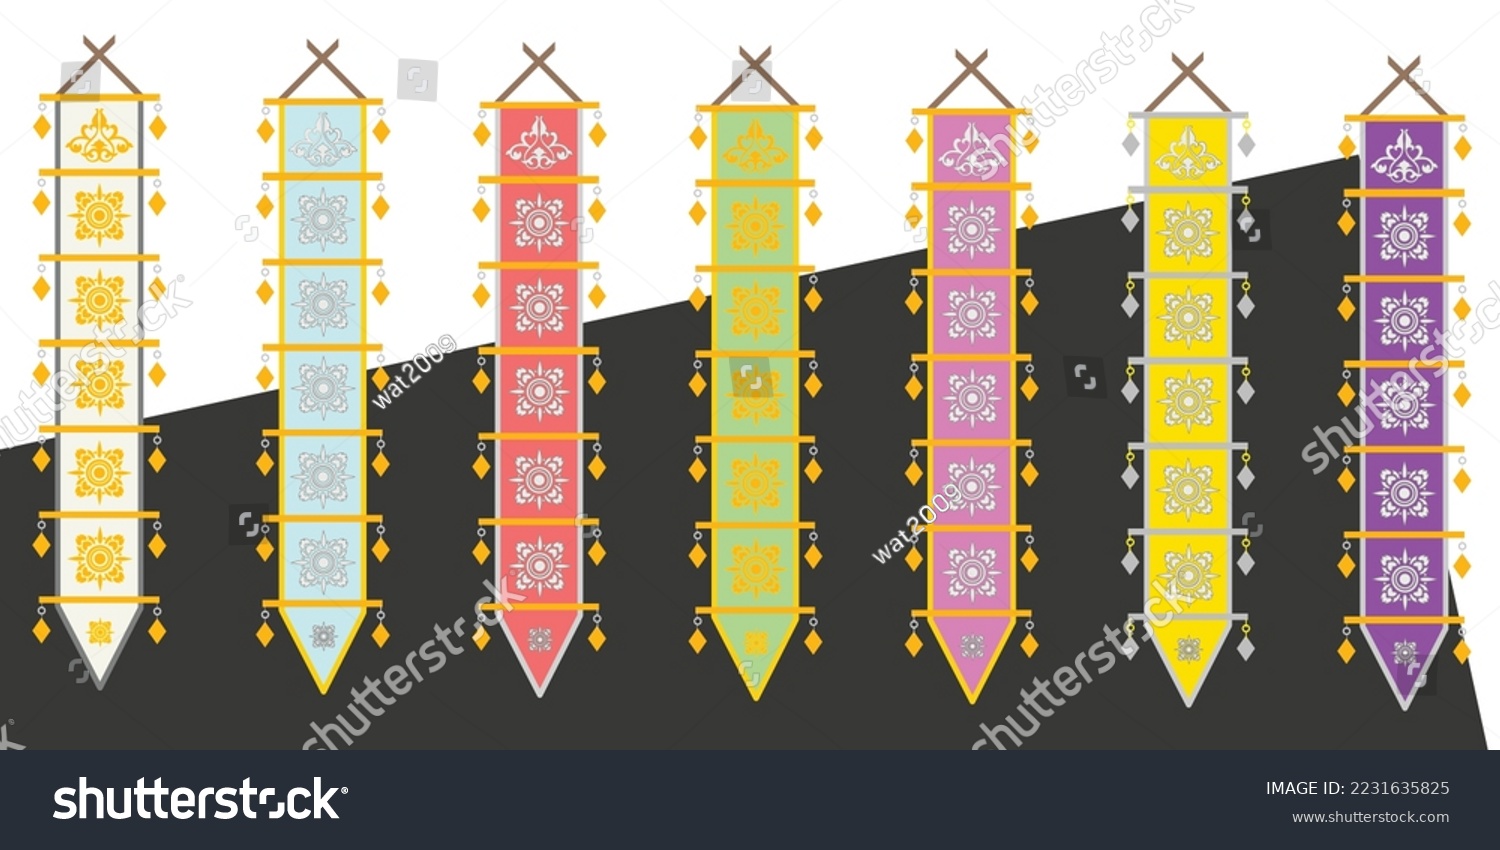 SVG of Tung- or traditional Lanna flag at northern of Thailand hanging for decorated. svg